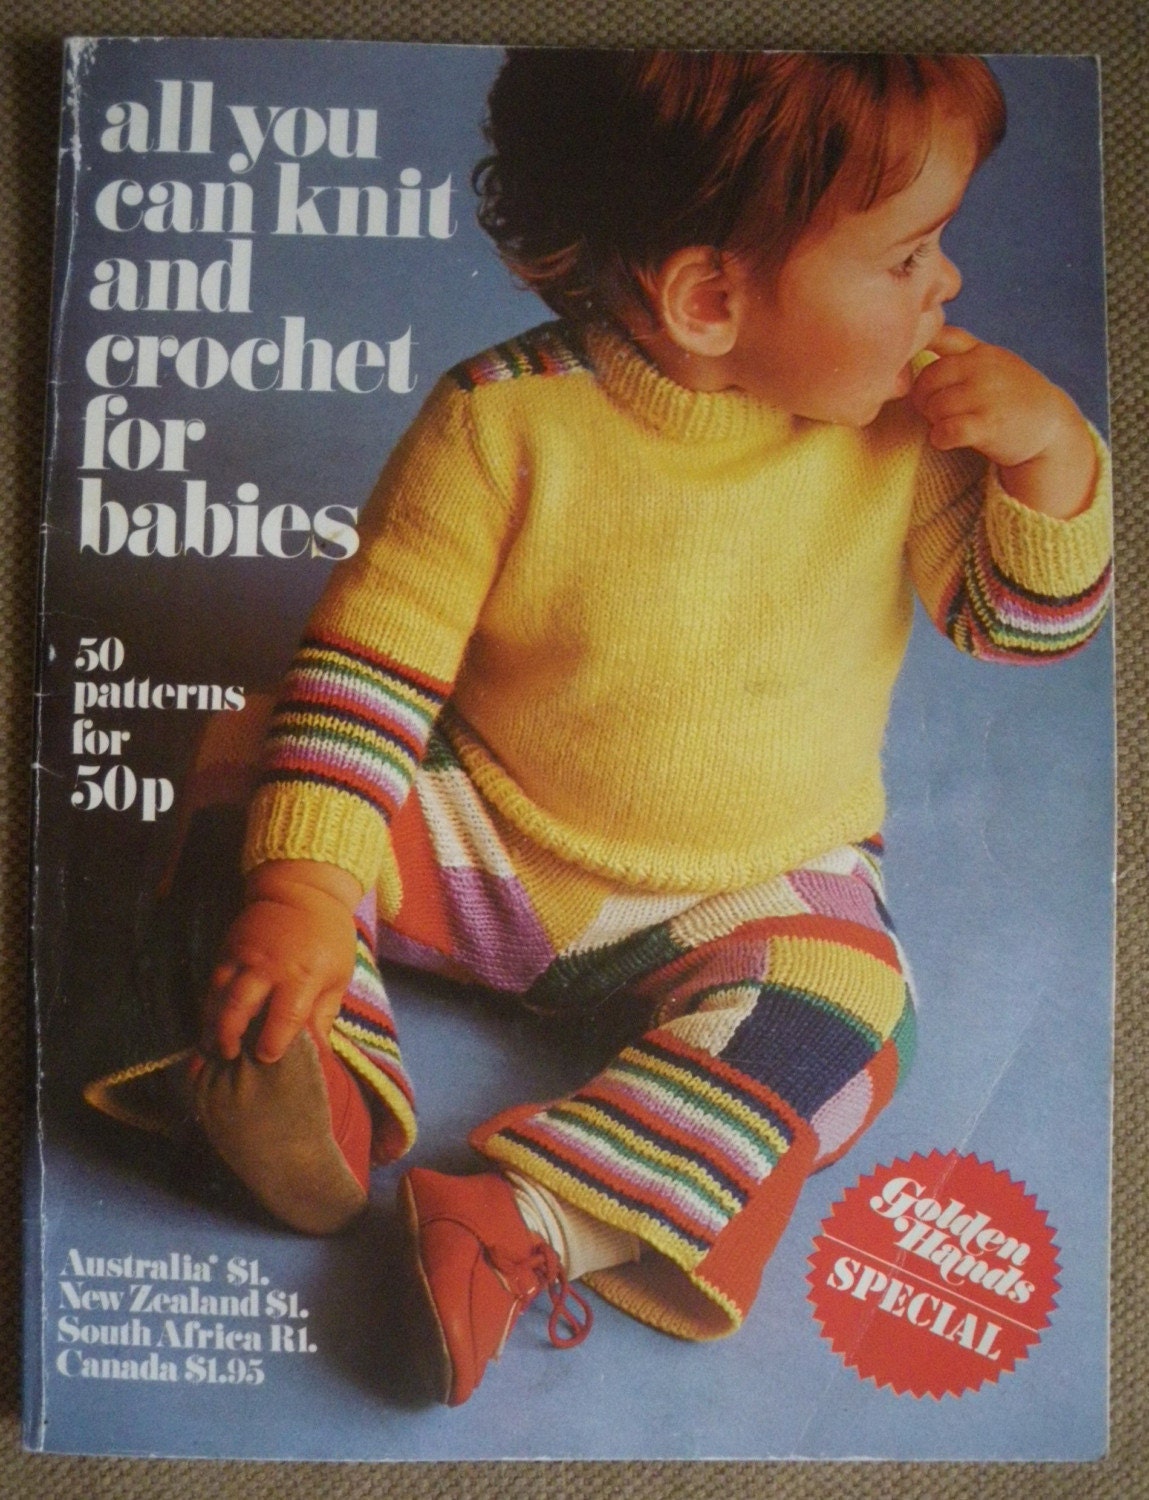 ALL YOU CAN KNIT AND CROCHET FOR BABIES - Golden Hands Special - Vintage 70s Knitting and Crochet Patterns